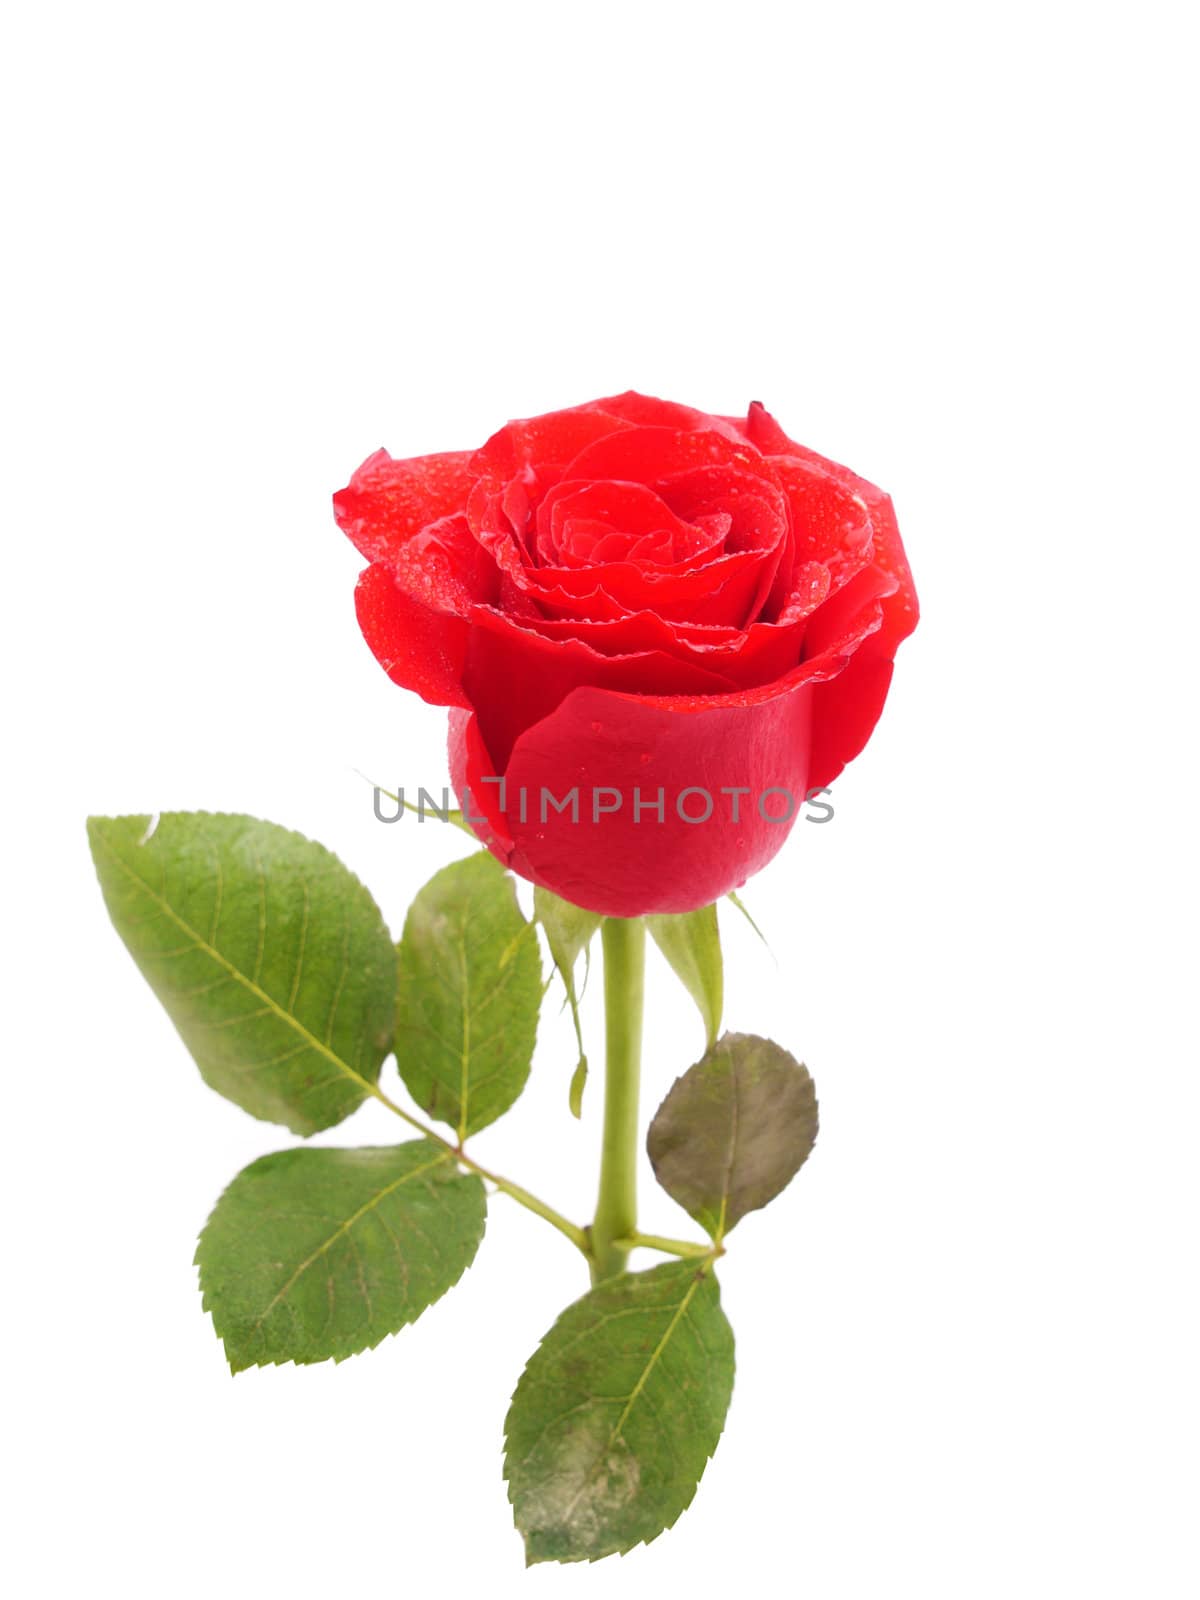 Rose on a white background by Enskanto